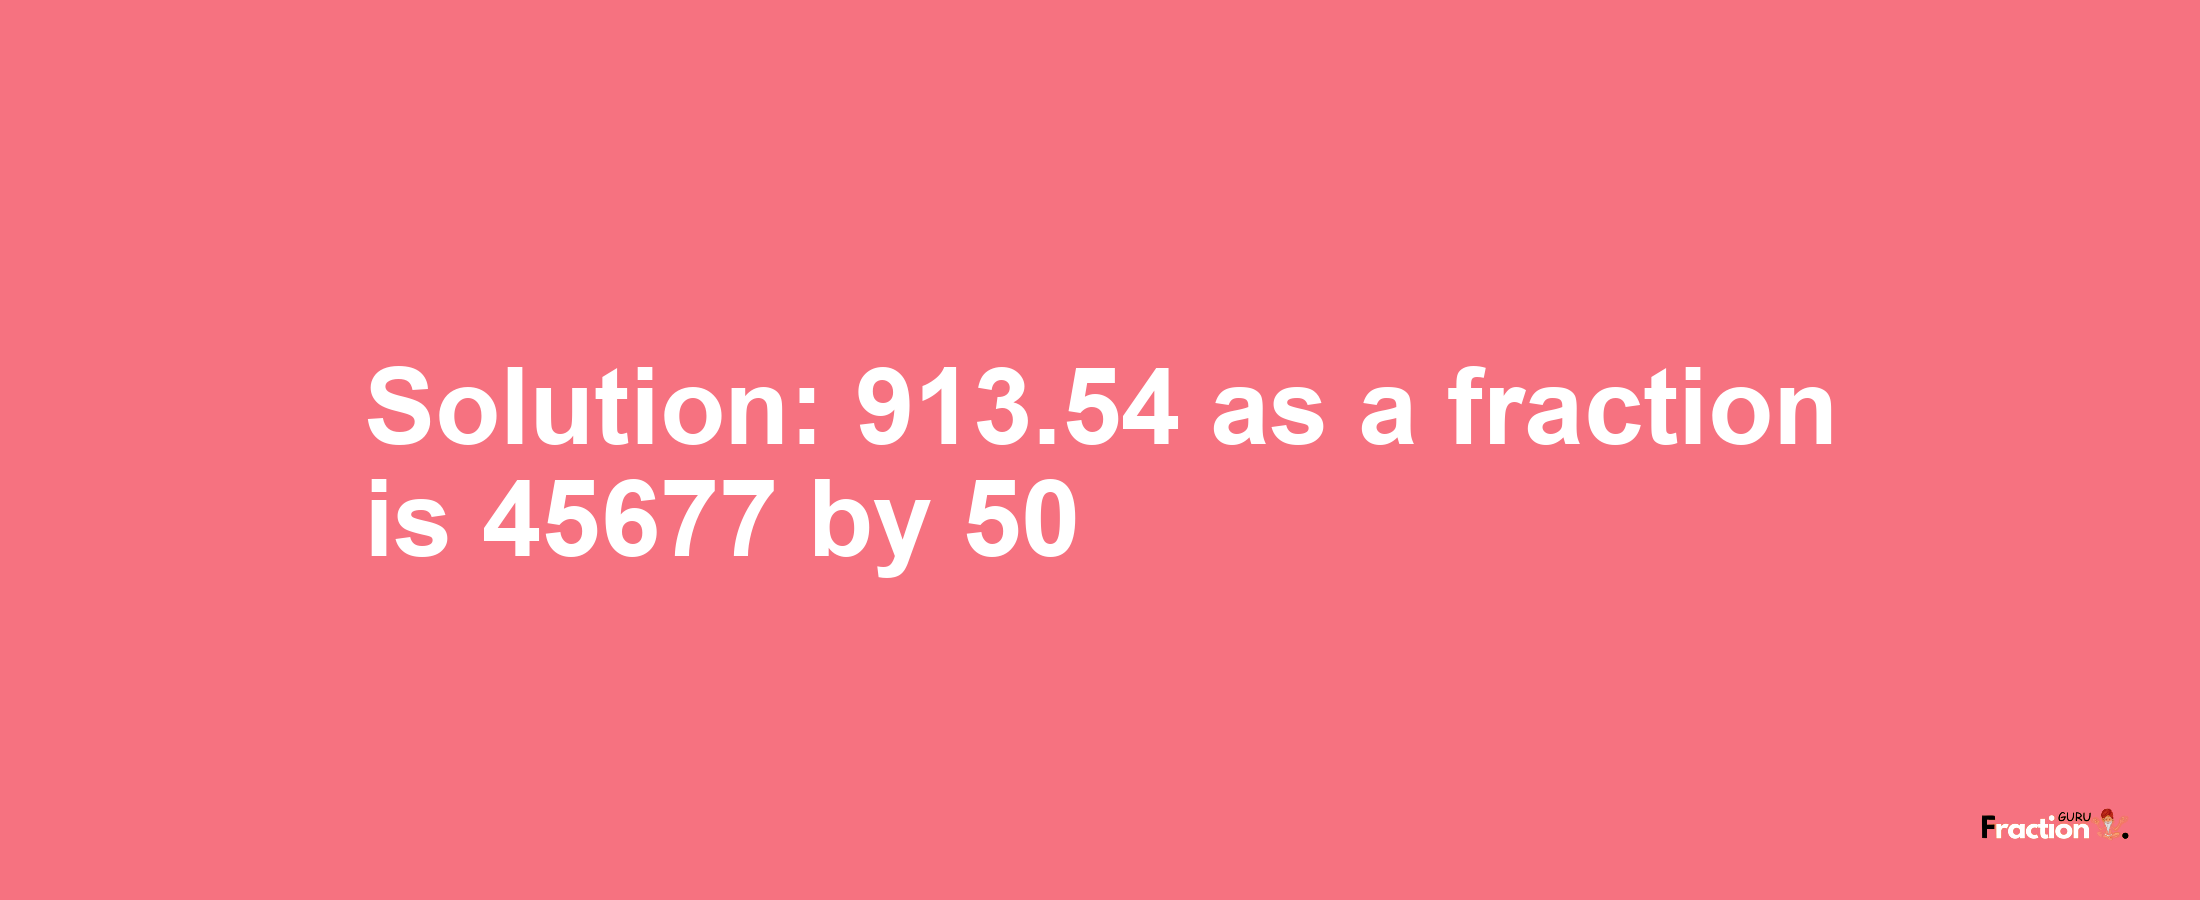 Solution:913.54 as a fraction is 45677/50